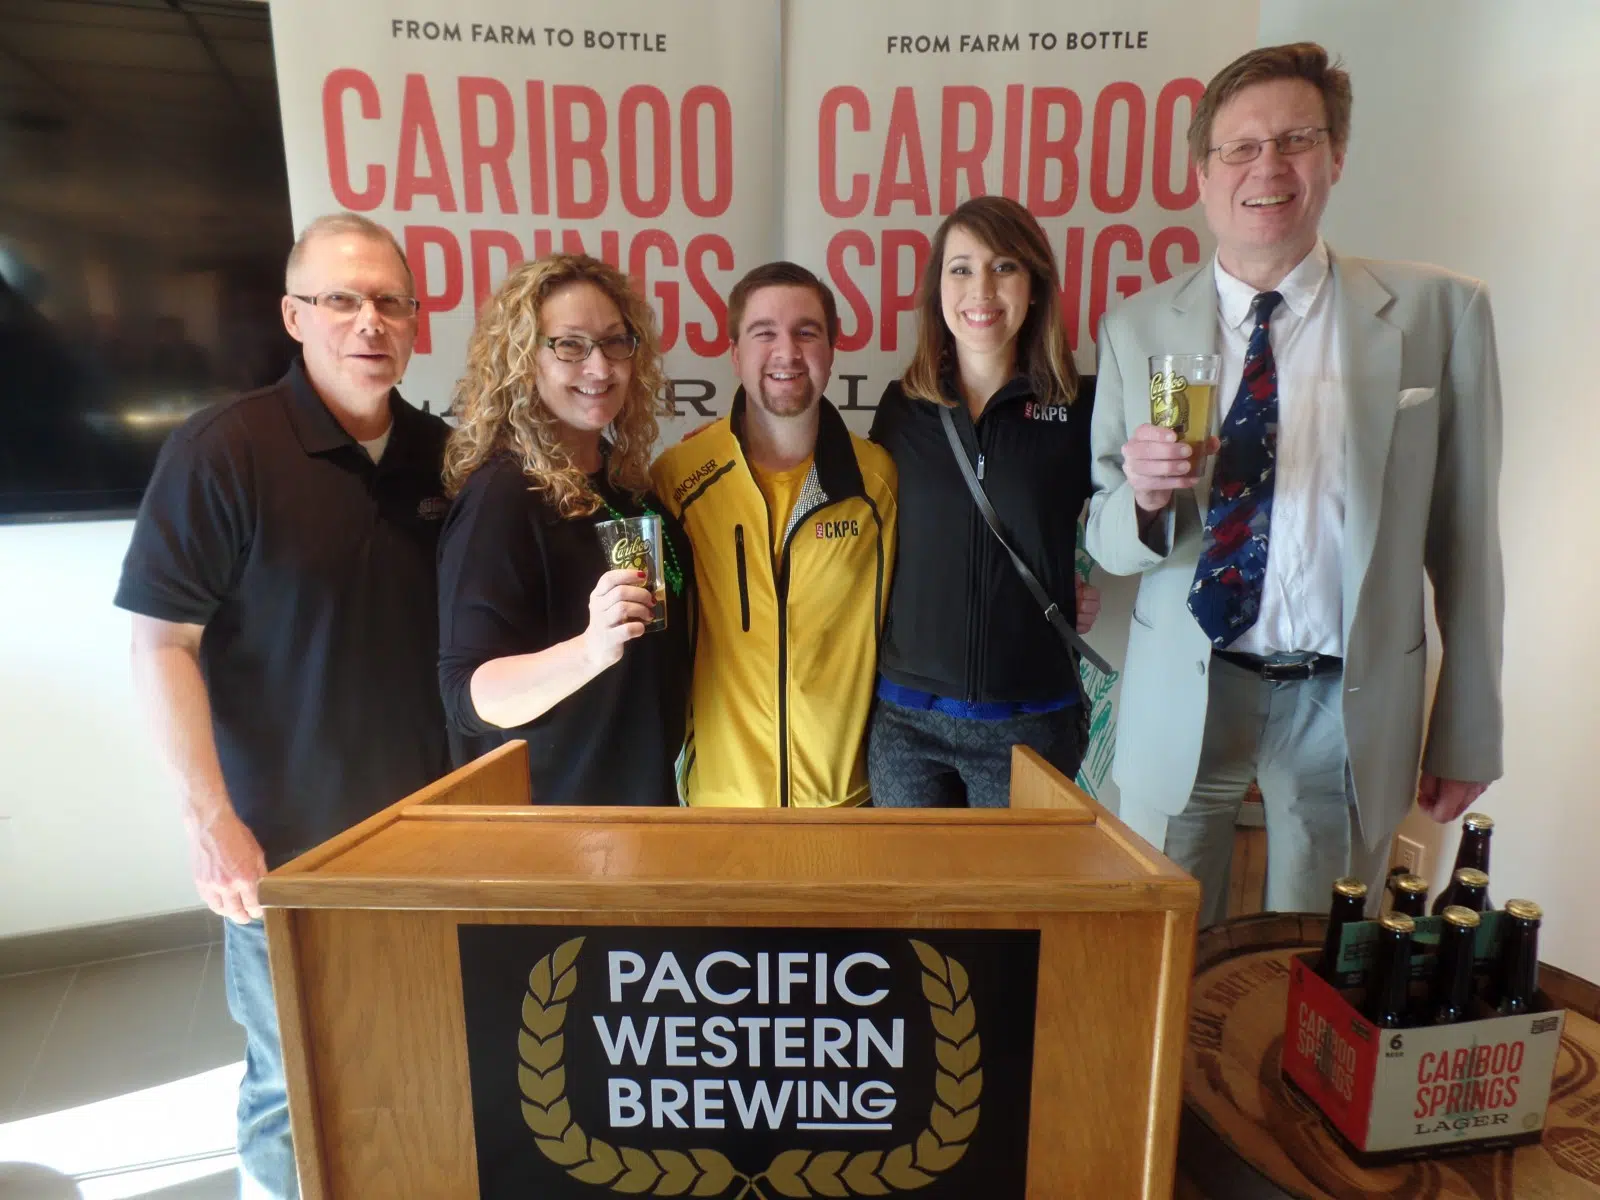 FunChaser @ Pacific Western Brewing - Cariboo Springs Launch